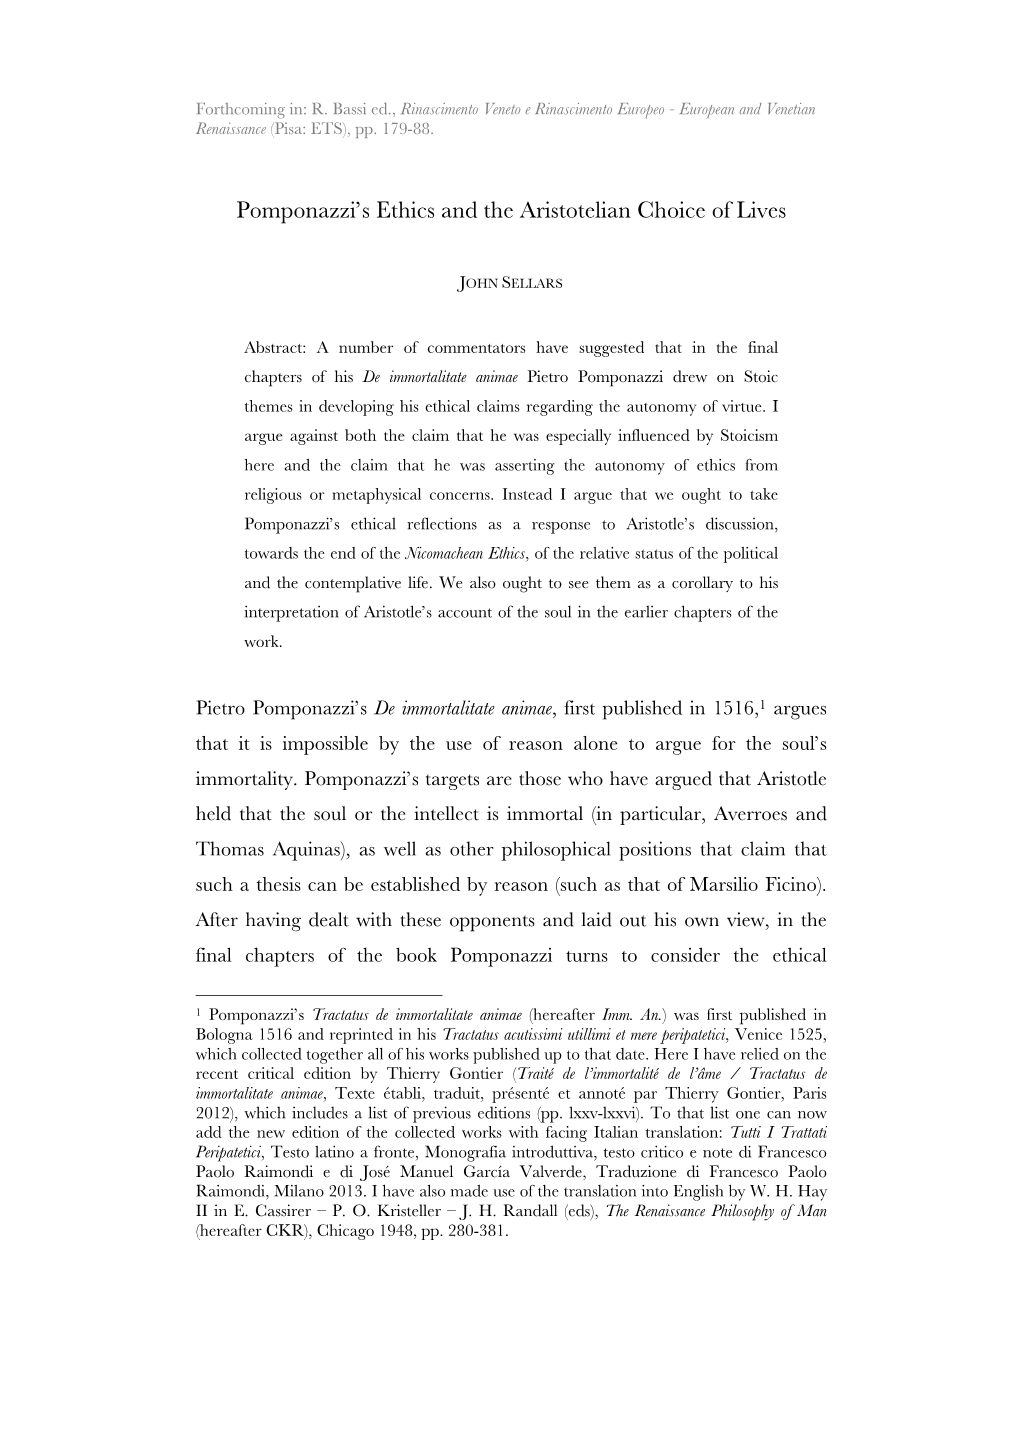 Pomponazzi's Ethics and the Aristotelian Choice of Lives (Preprint)